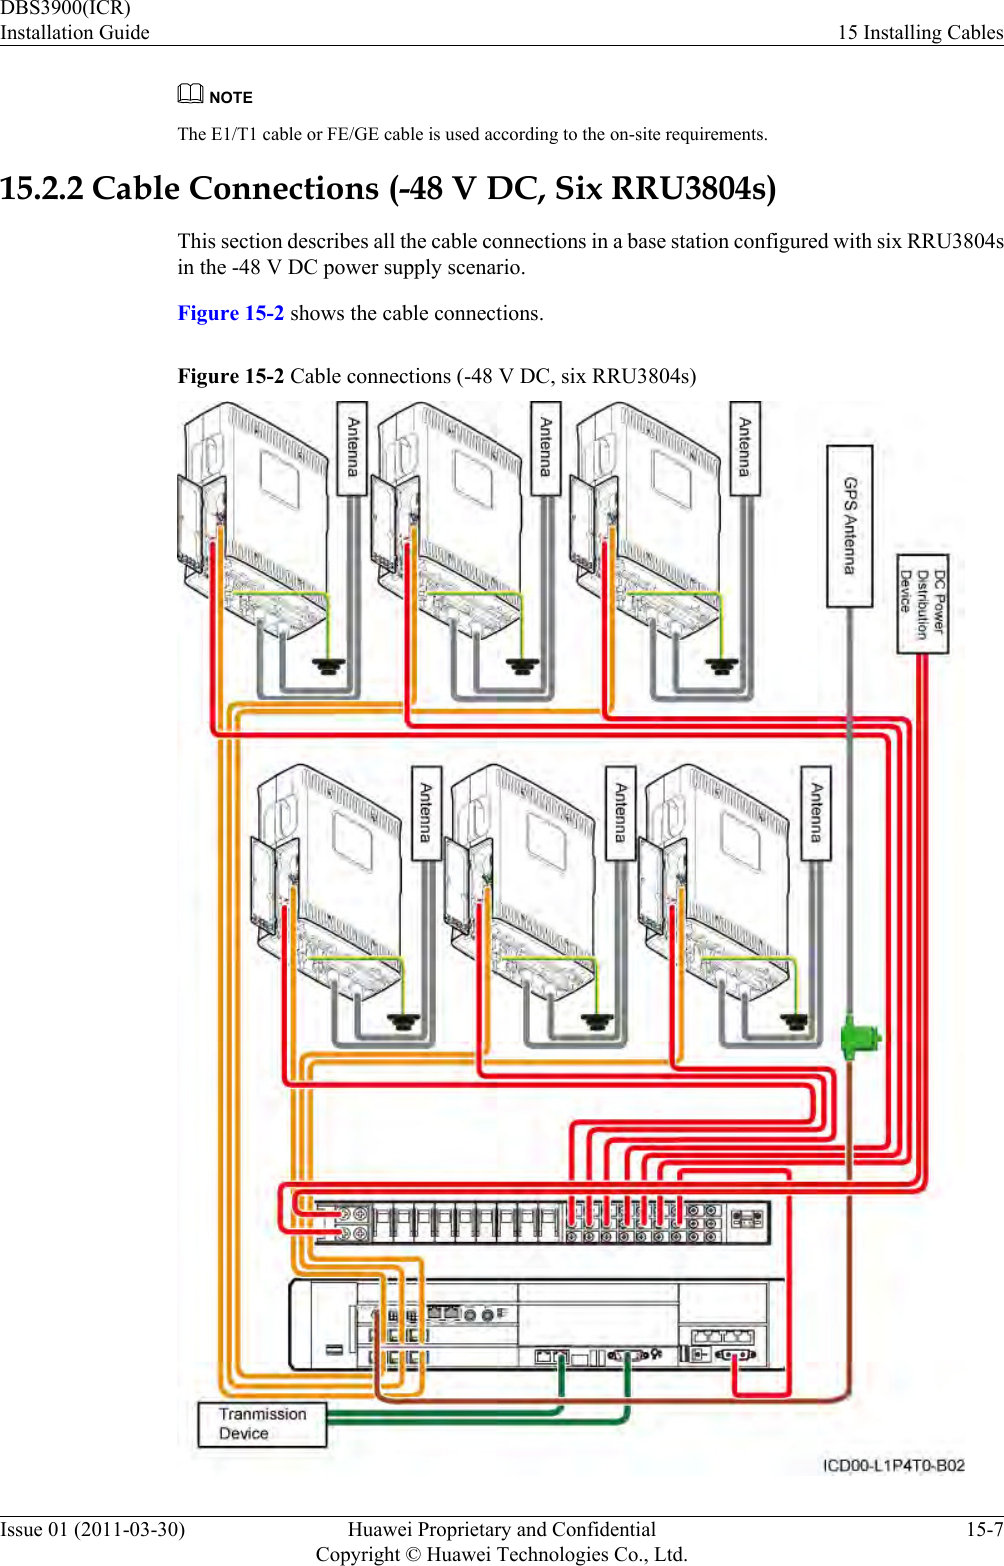 NOTEThe E1/T1 cable or FE/GE cable is used according to the on-site requirements.15.2.2 Cable Connections (-48 V DC, Six RRU3804s)This section describes all the cable connections in a base station configured with six RRU3804sin the -48 V DC power supply scenario.Figure 15-2 shows the cable connections.Figure 15-2 Cable connections (-48 V DC, six RRU3804s)DBS3900(ICR)Installation Guide 15 Installing CablesIssue 01 (2011-03-30) Huawei Proprietary and ConfidentialCopyright © Huawei Technologies Co., Ltd.15-7